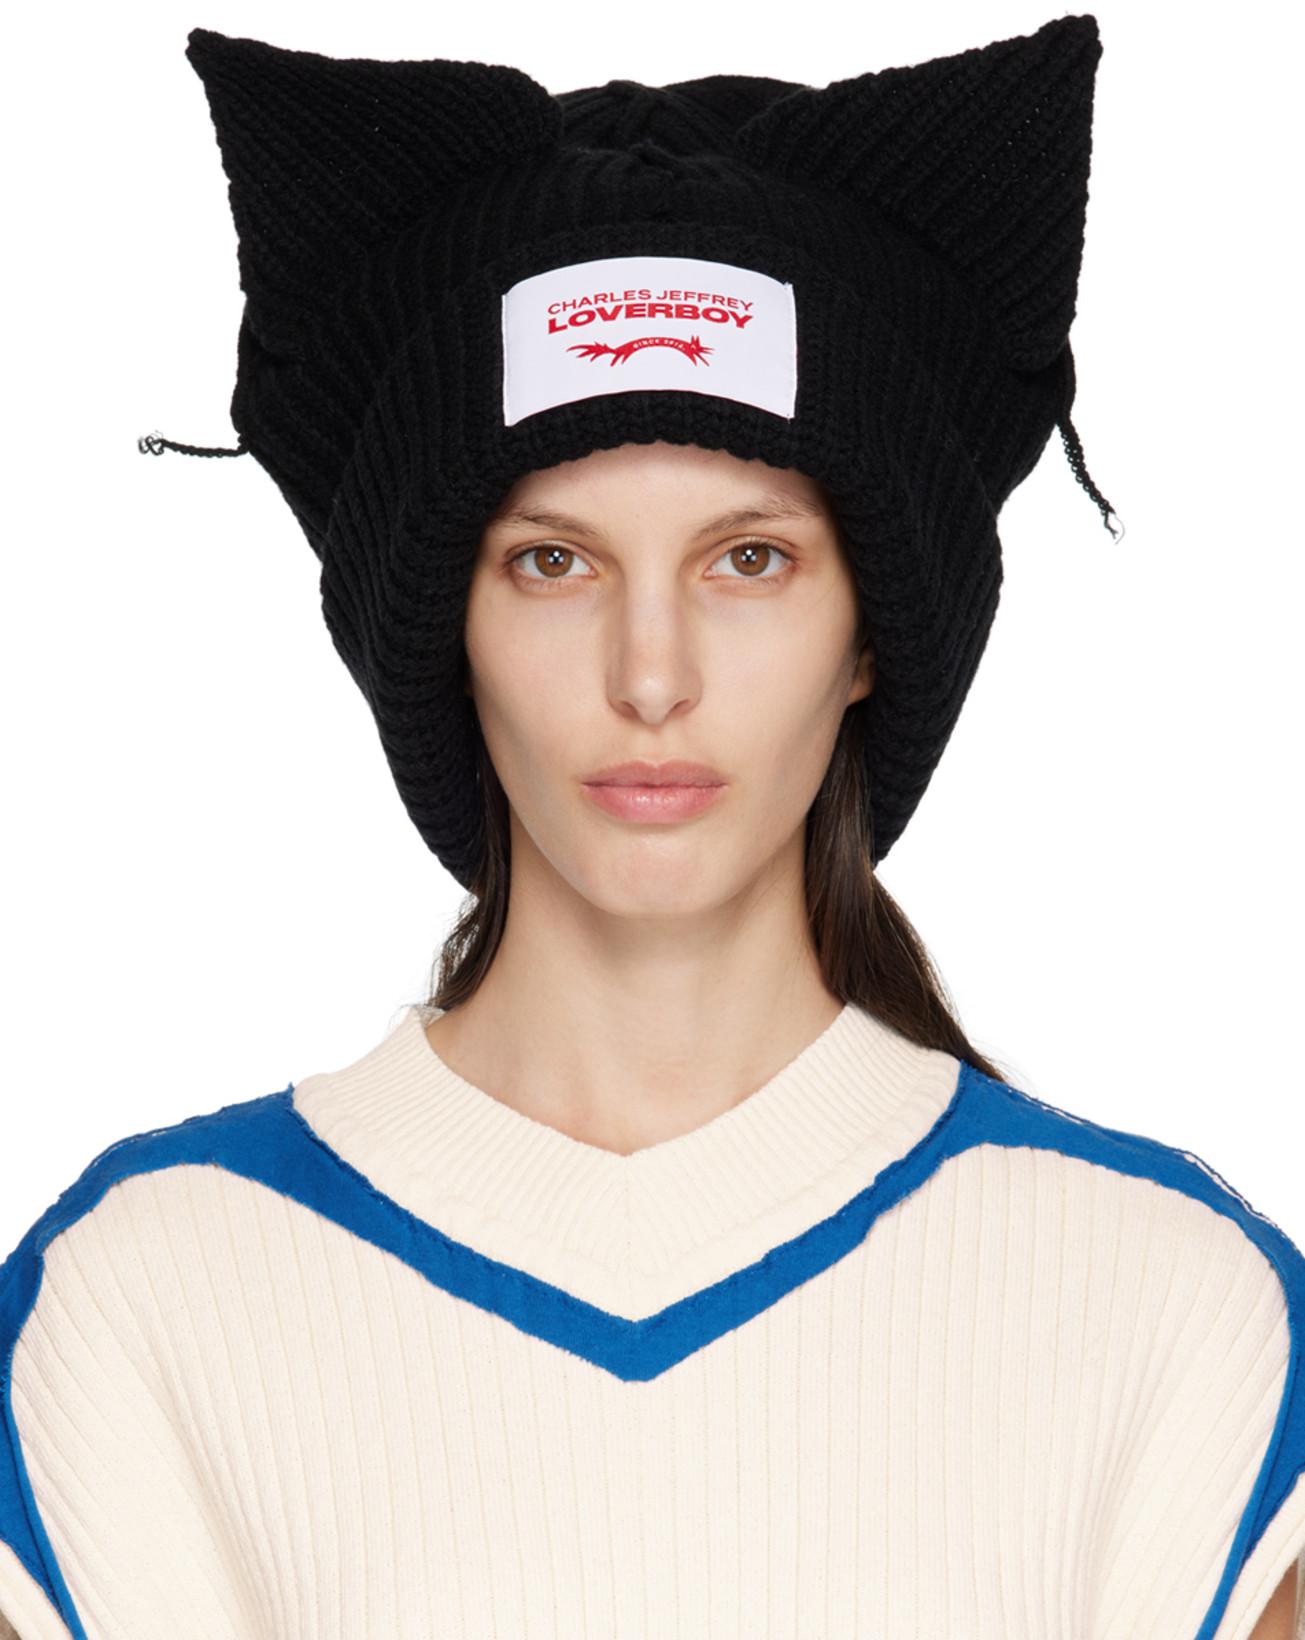 Black Supersized Chunky Ears Beanie by CHARLES JEFFREY LOVERBOY